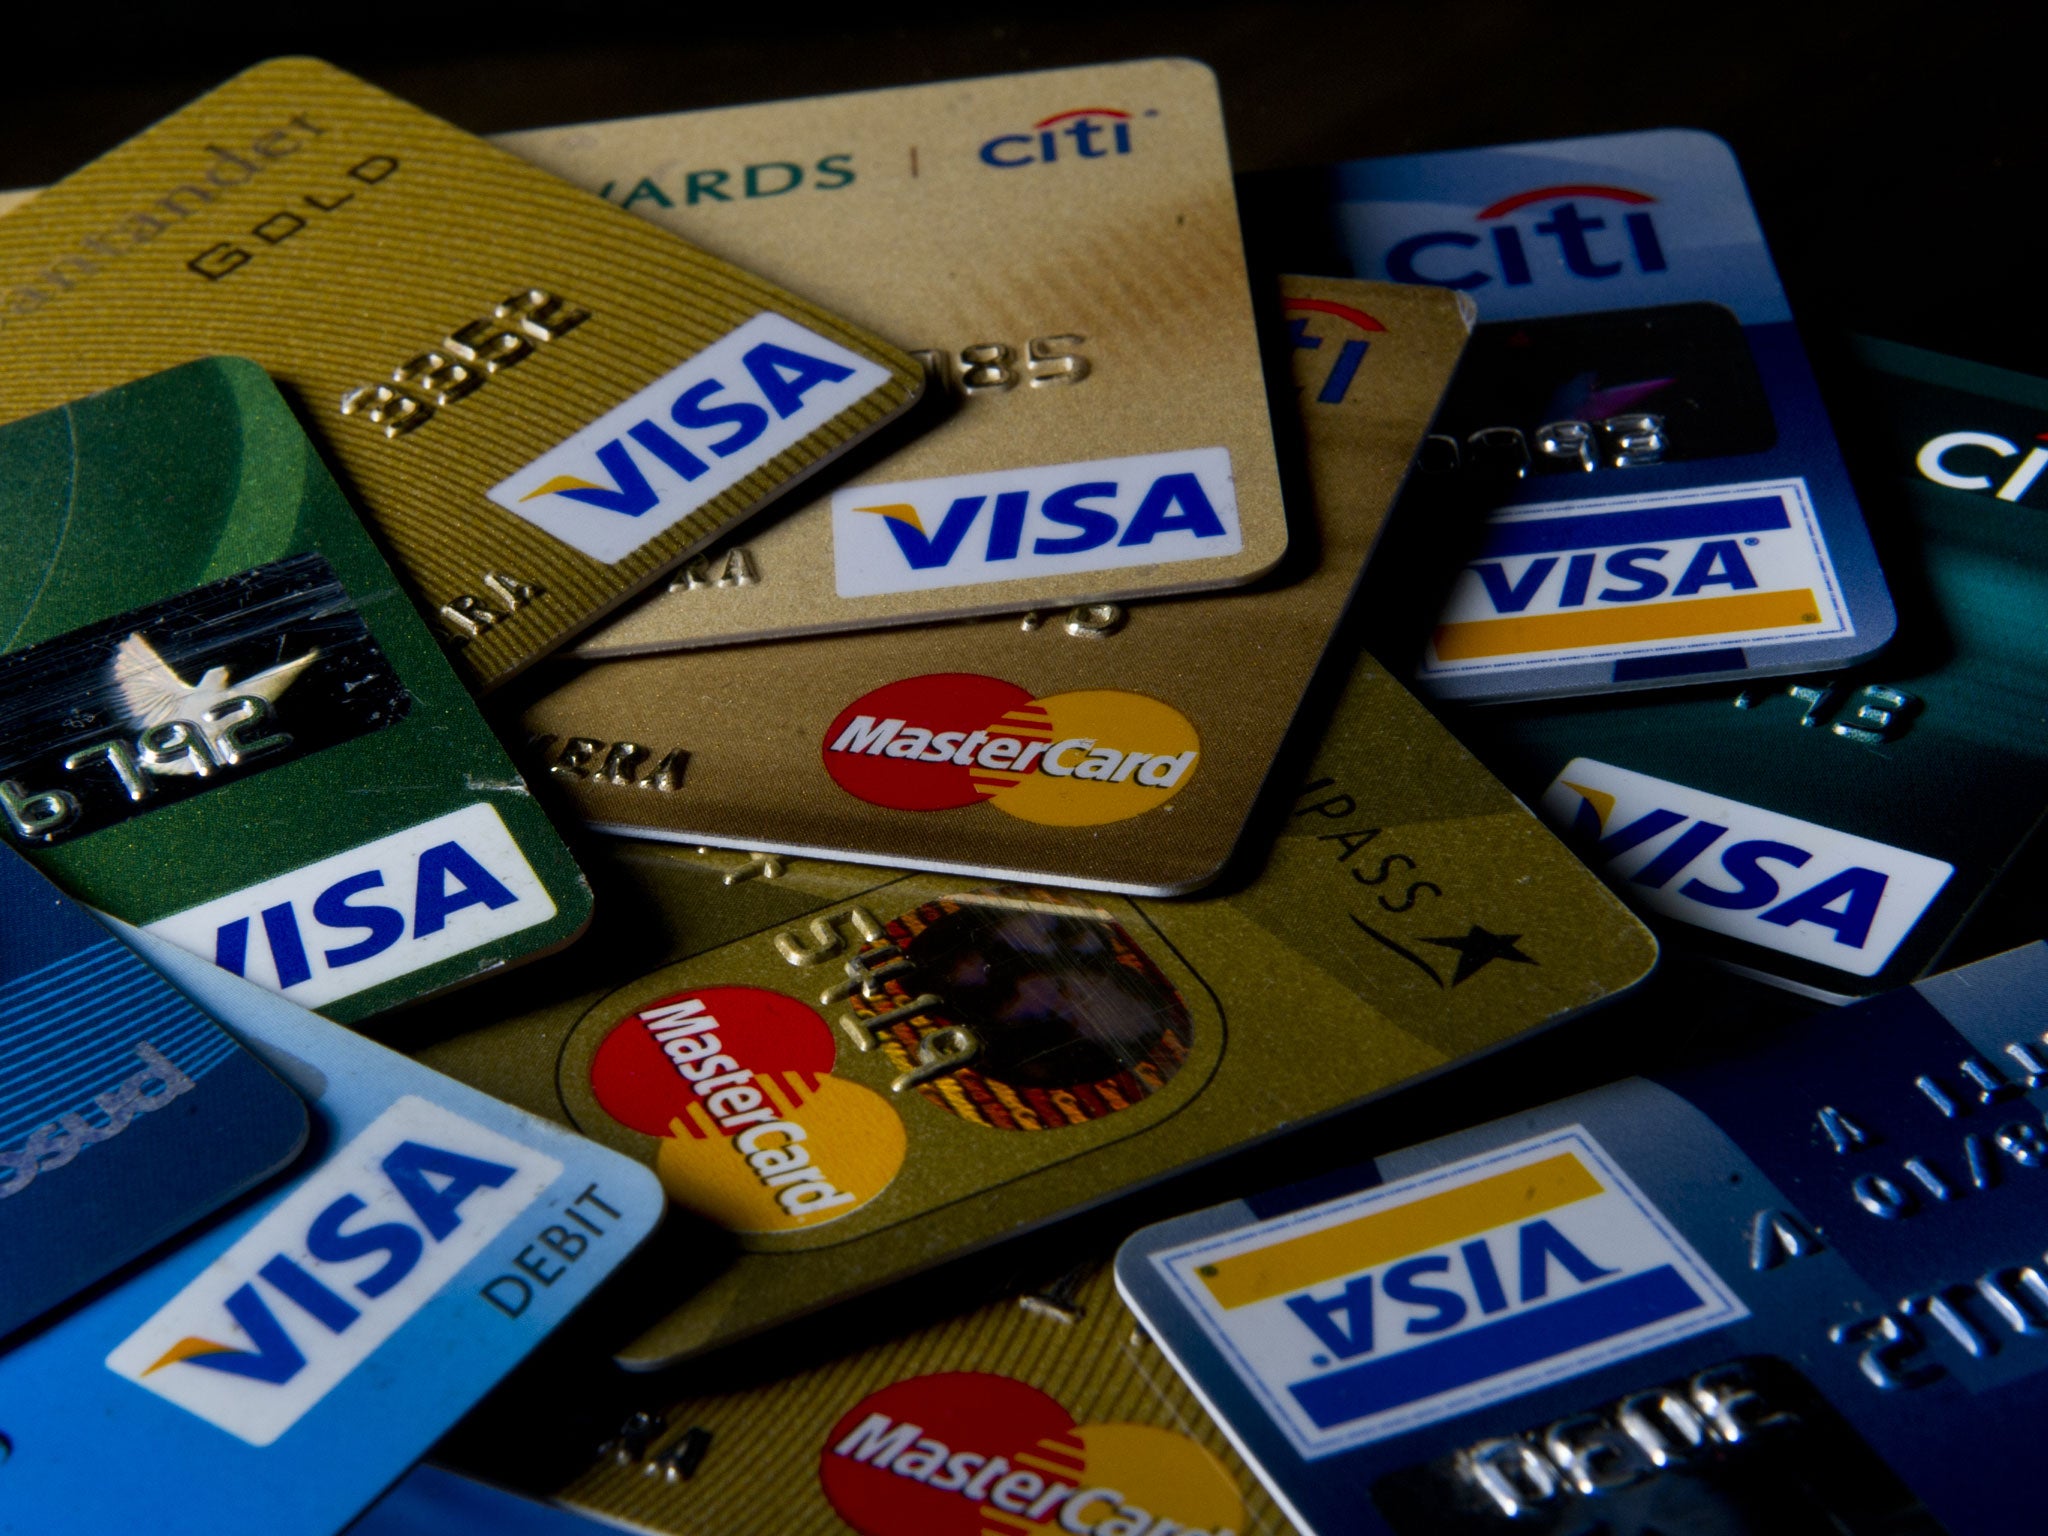 Identity-theft insurance was often sold alongside the activation of credit and debit cards